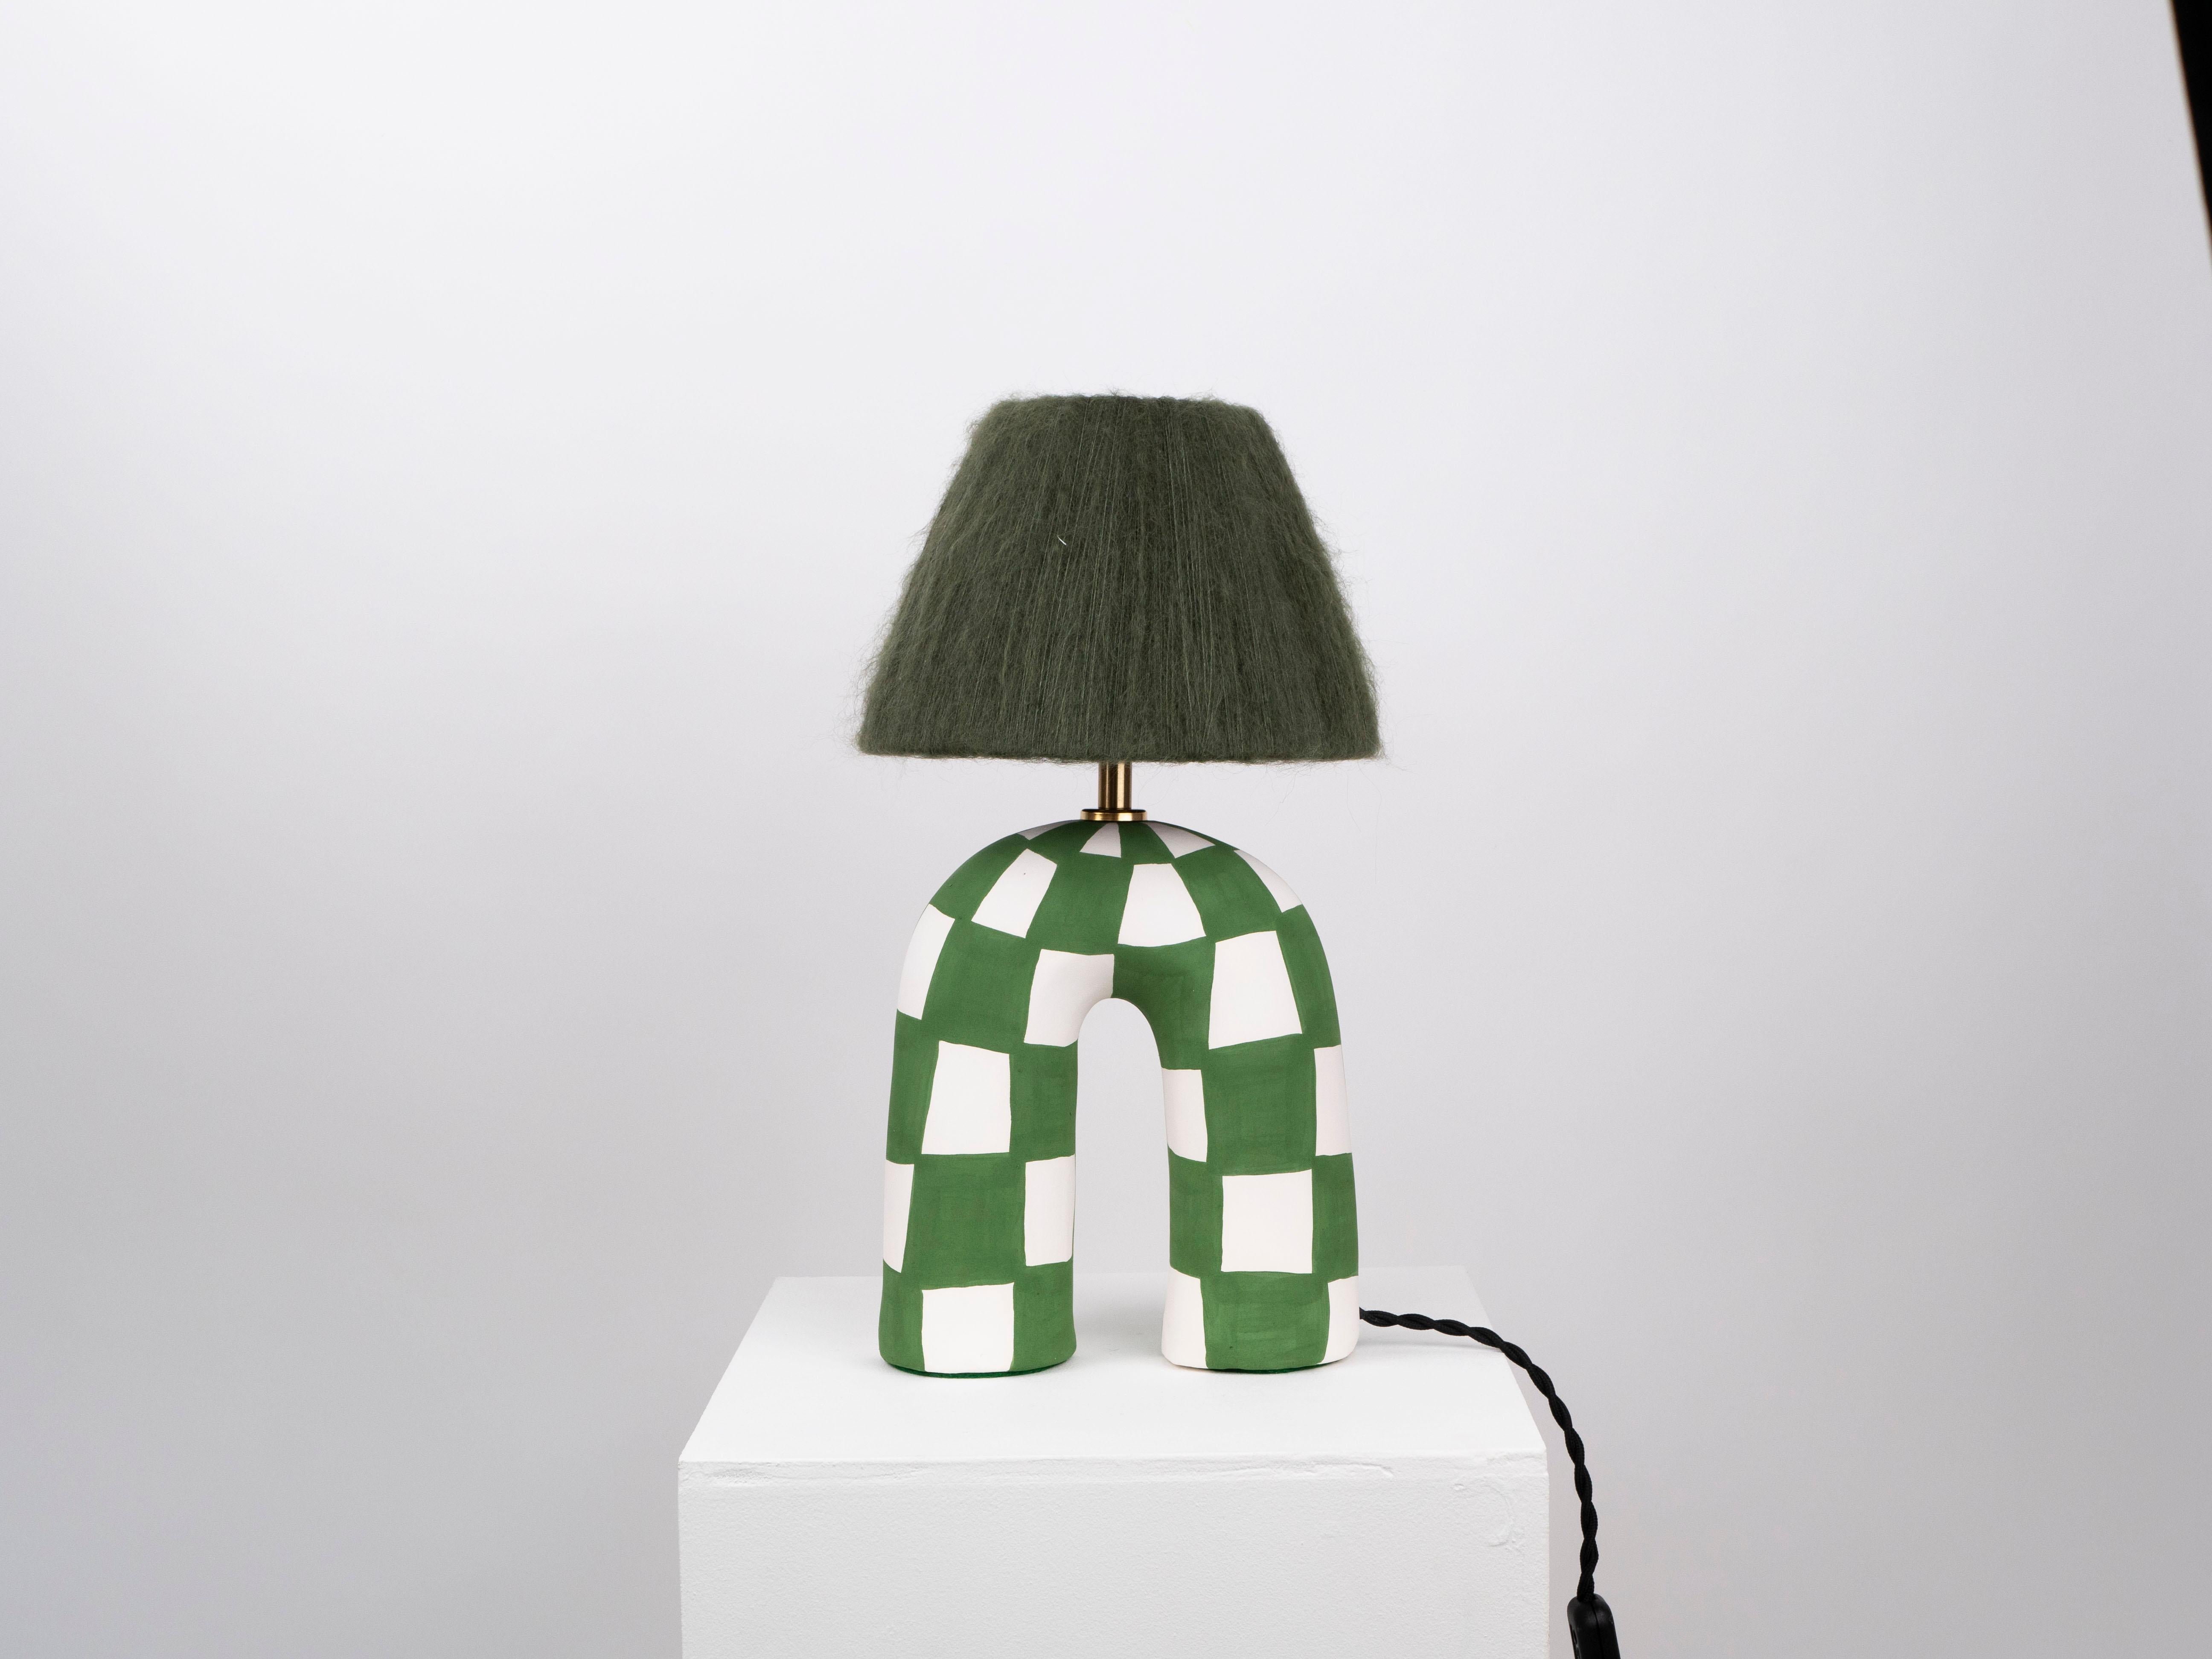 Glazed 'You' Table Lamp - Emerald Checkerboard (Matte) For Sale